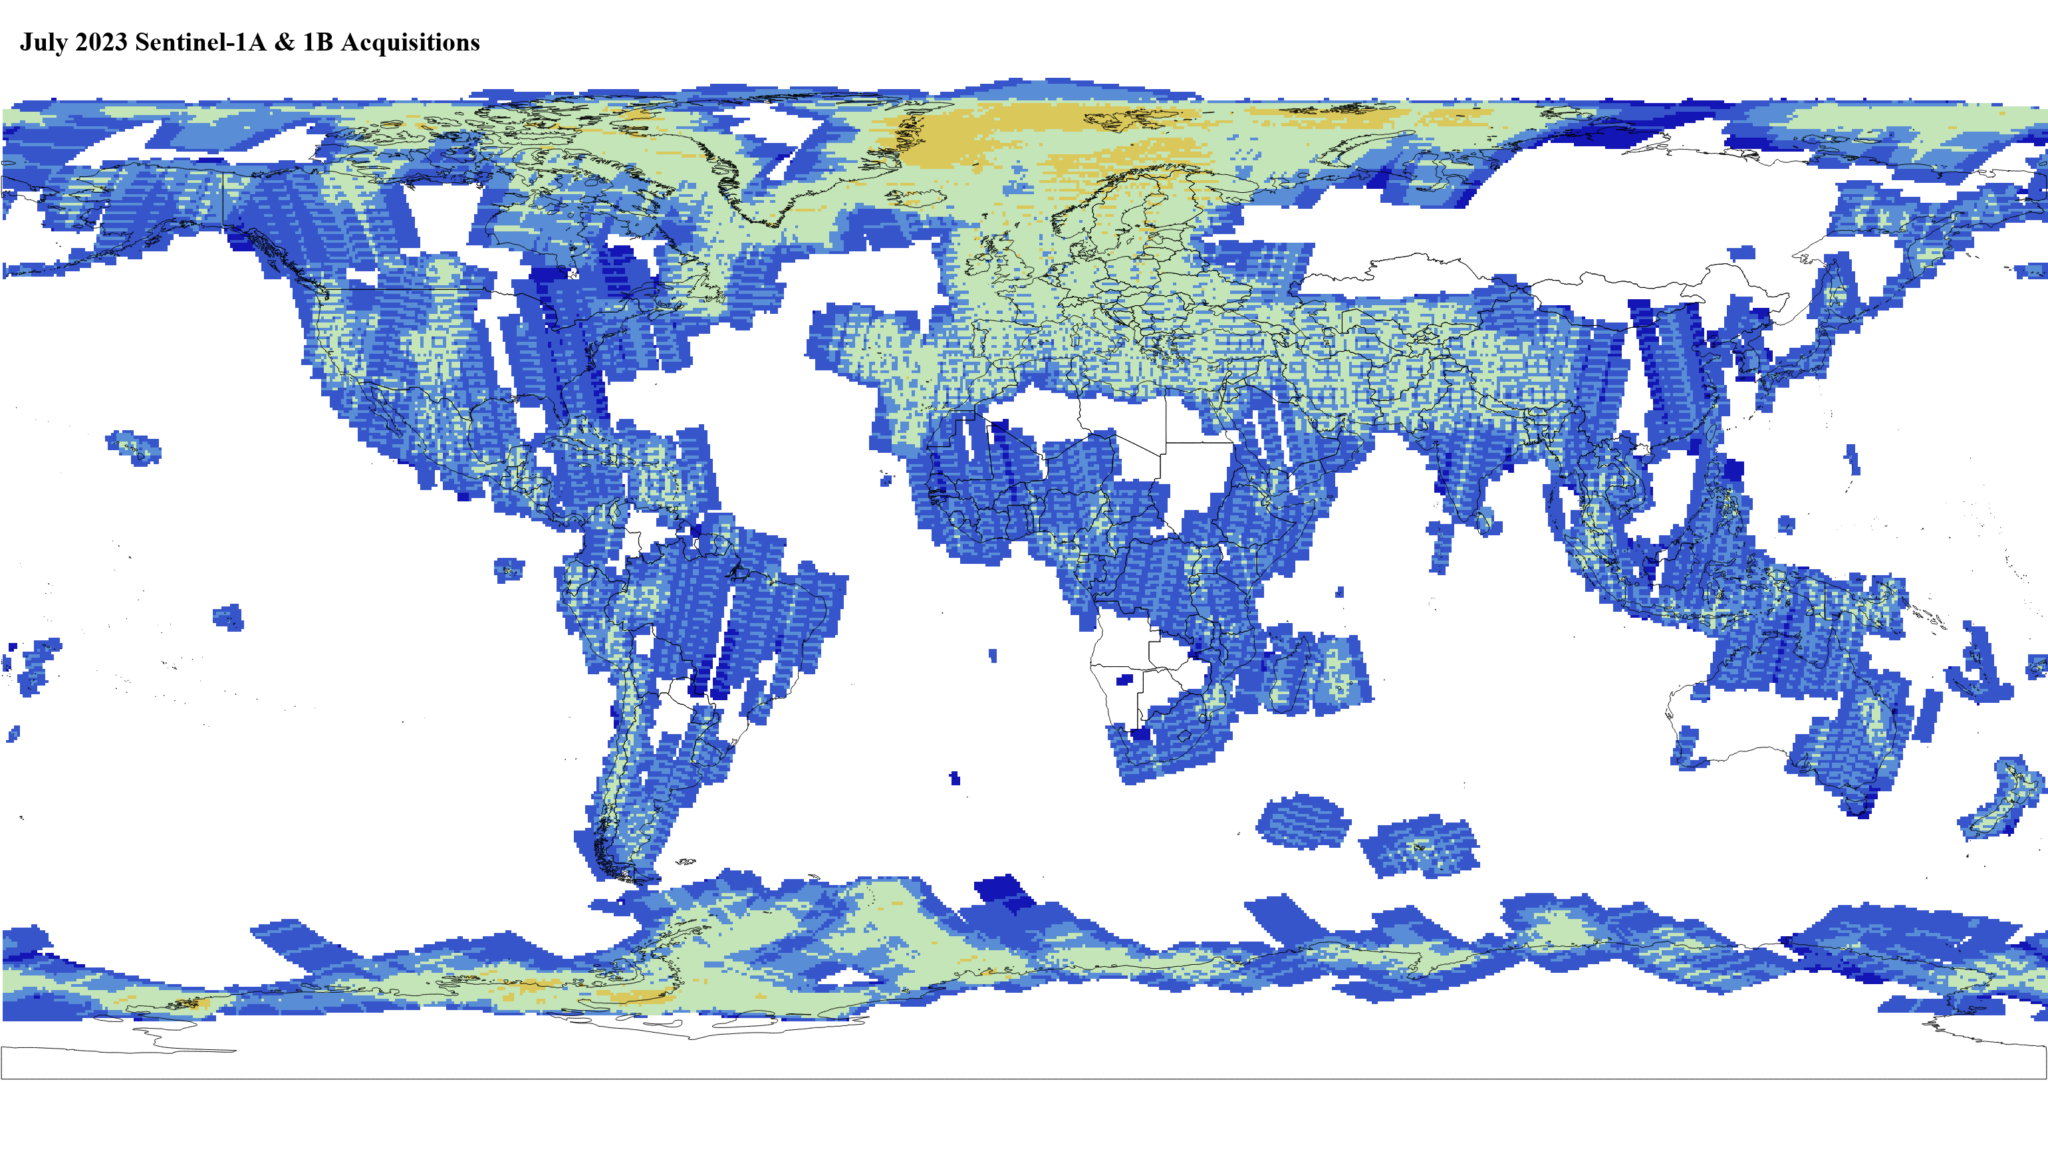 Heat map of Sentinel-1A and -1B GRD global acquisitions July 2023